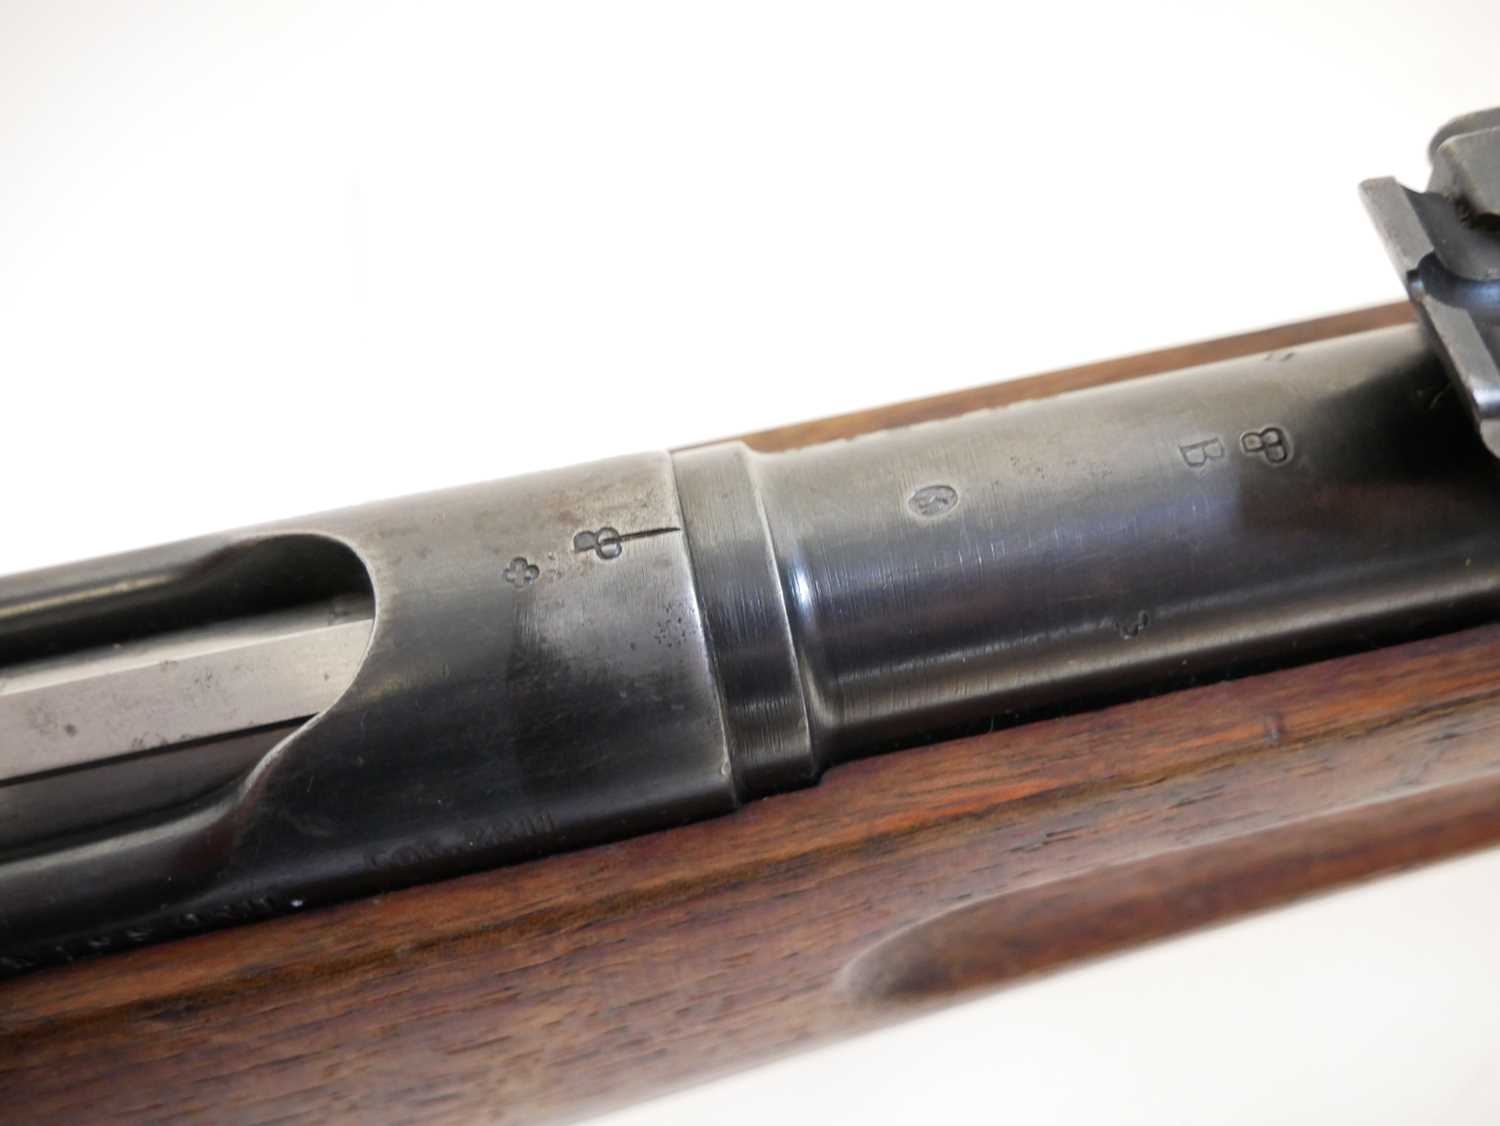 Schmidt Rubin 1896 7.5mm straight pull rifle, matching serial numbers 268510 to barrel, receiver, - Image 6 of 15